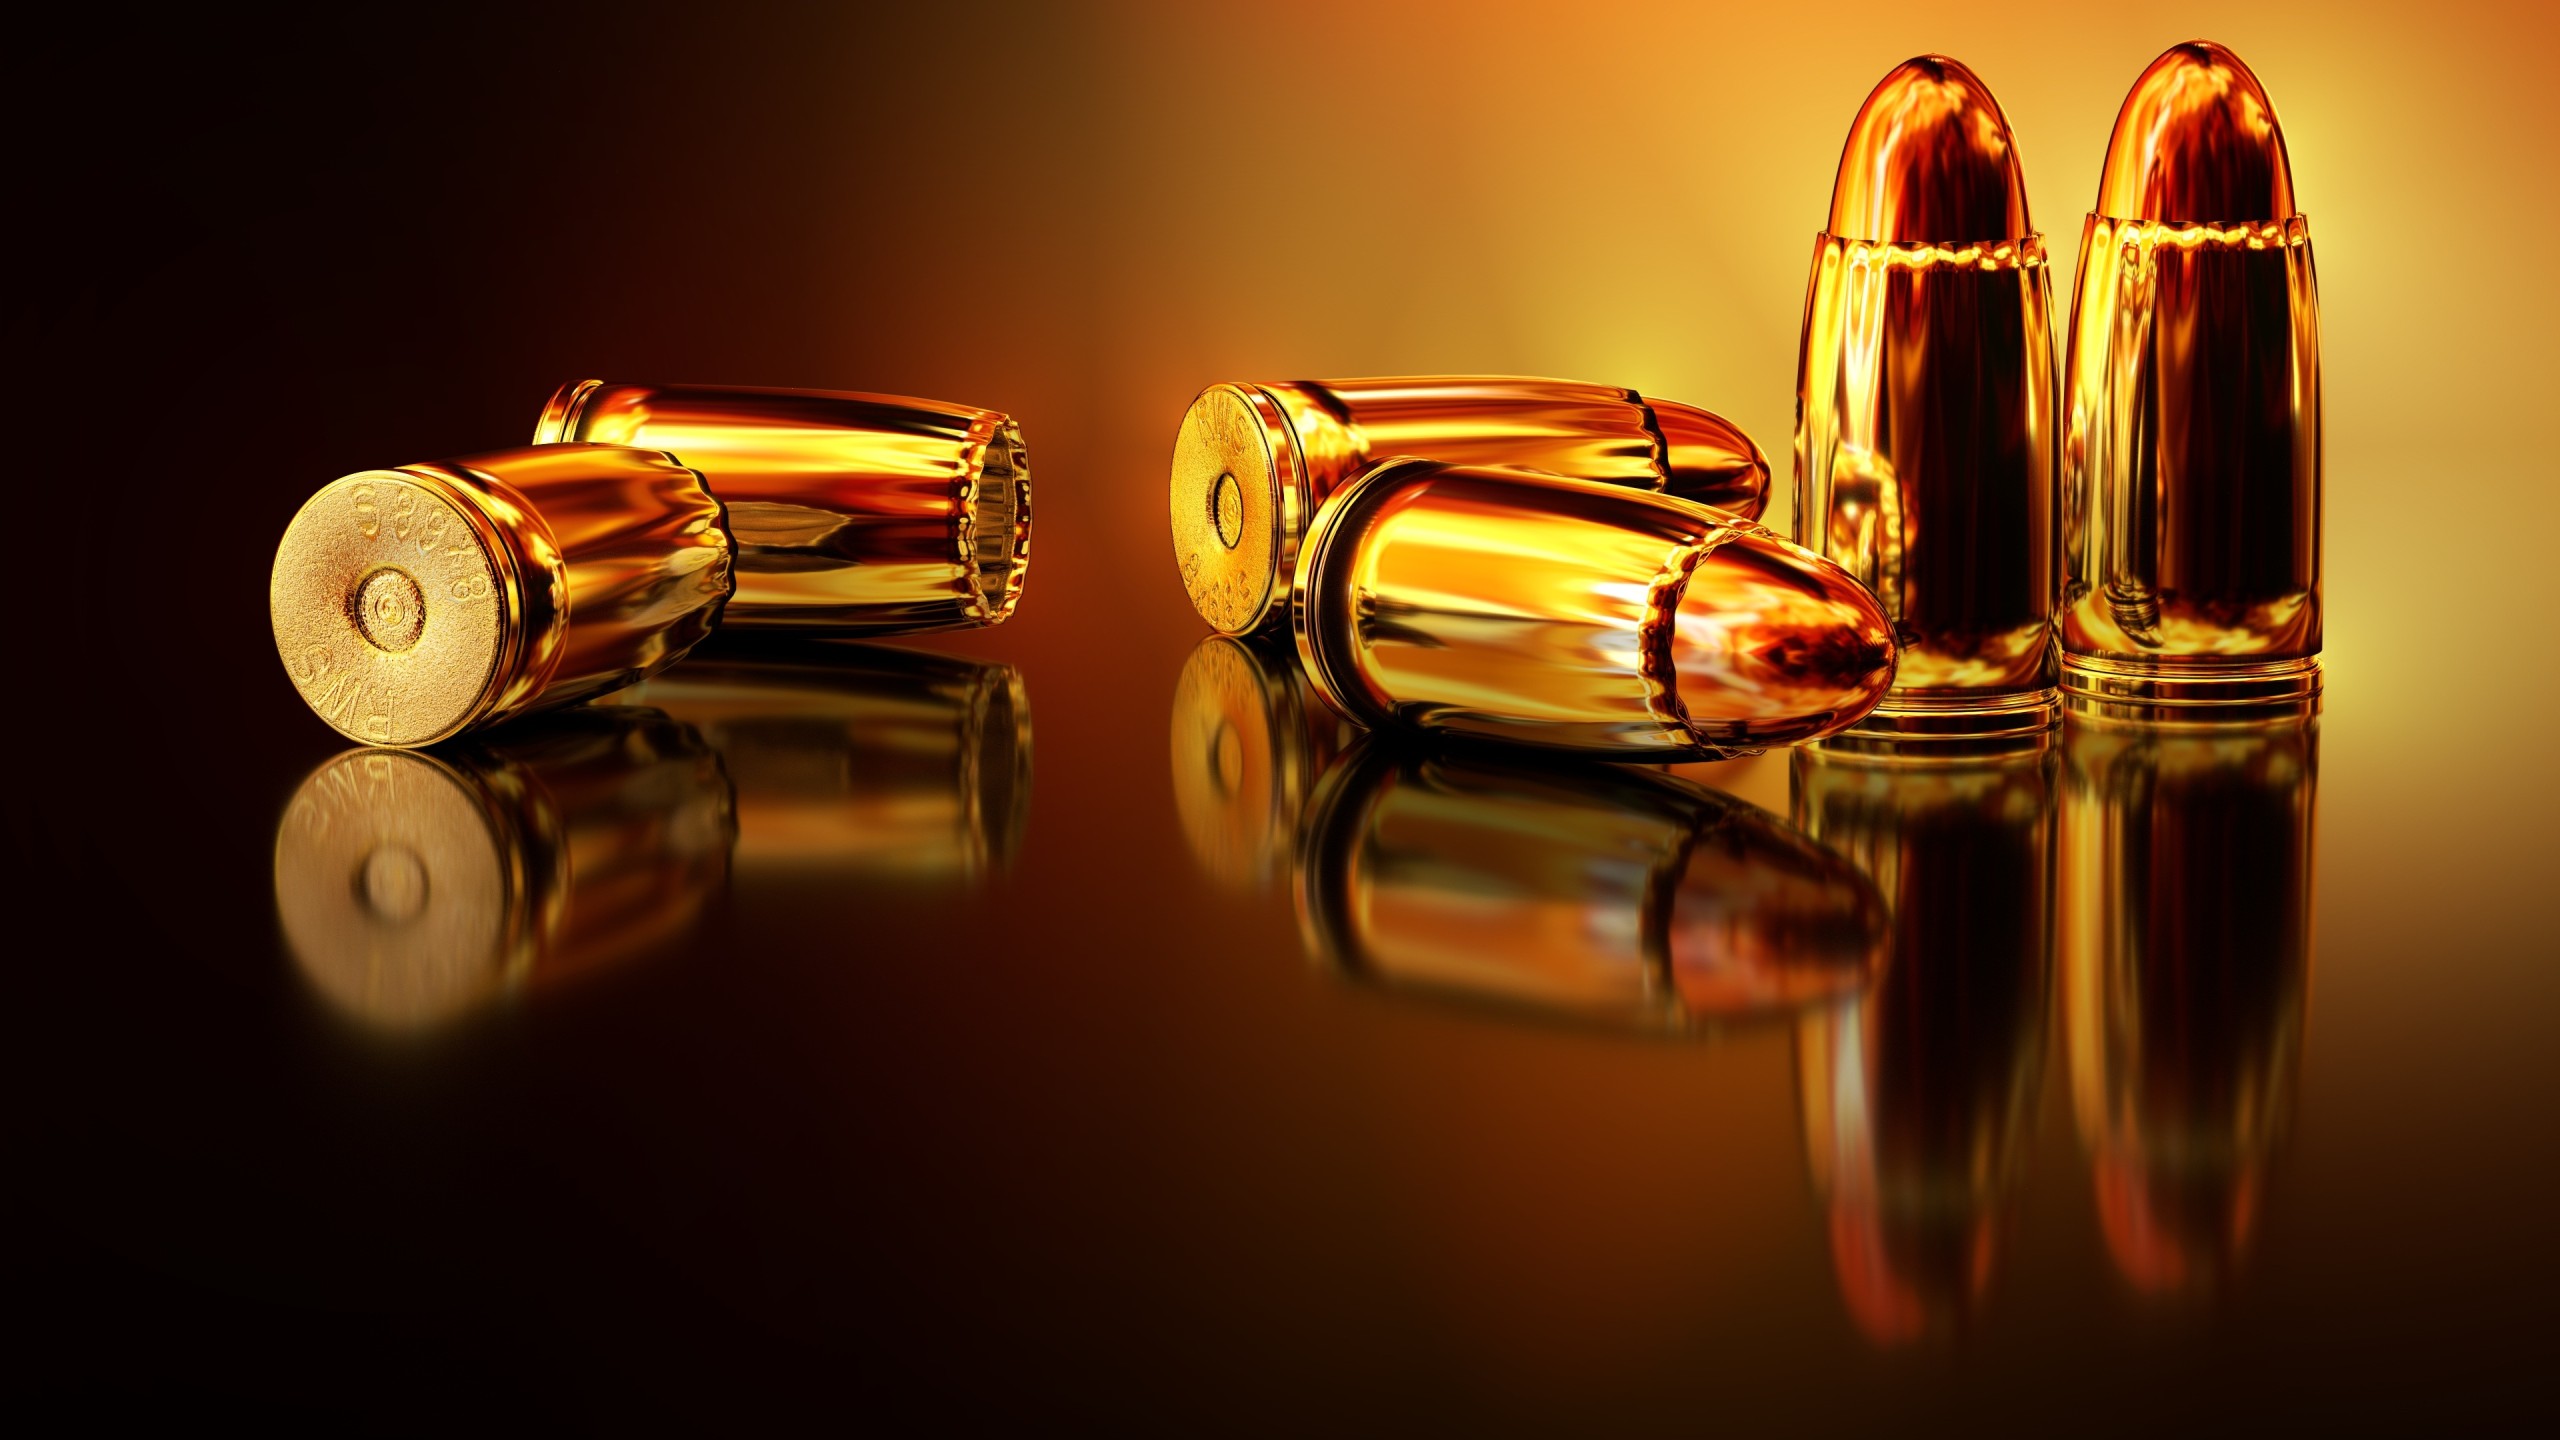 Ammunition Wallpapers HD Ammunition Backgrounds Free Images Download